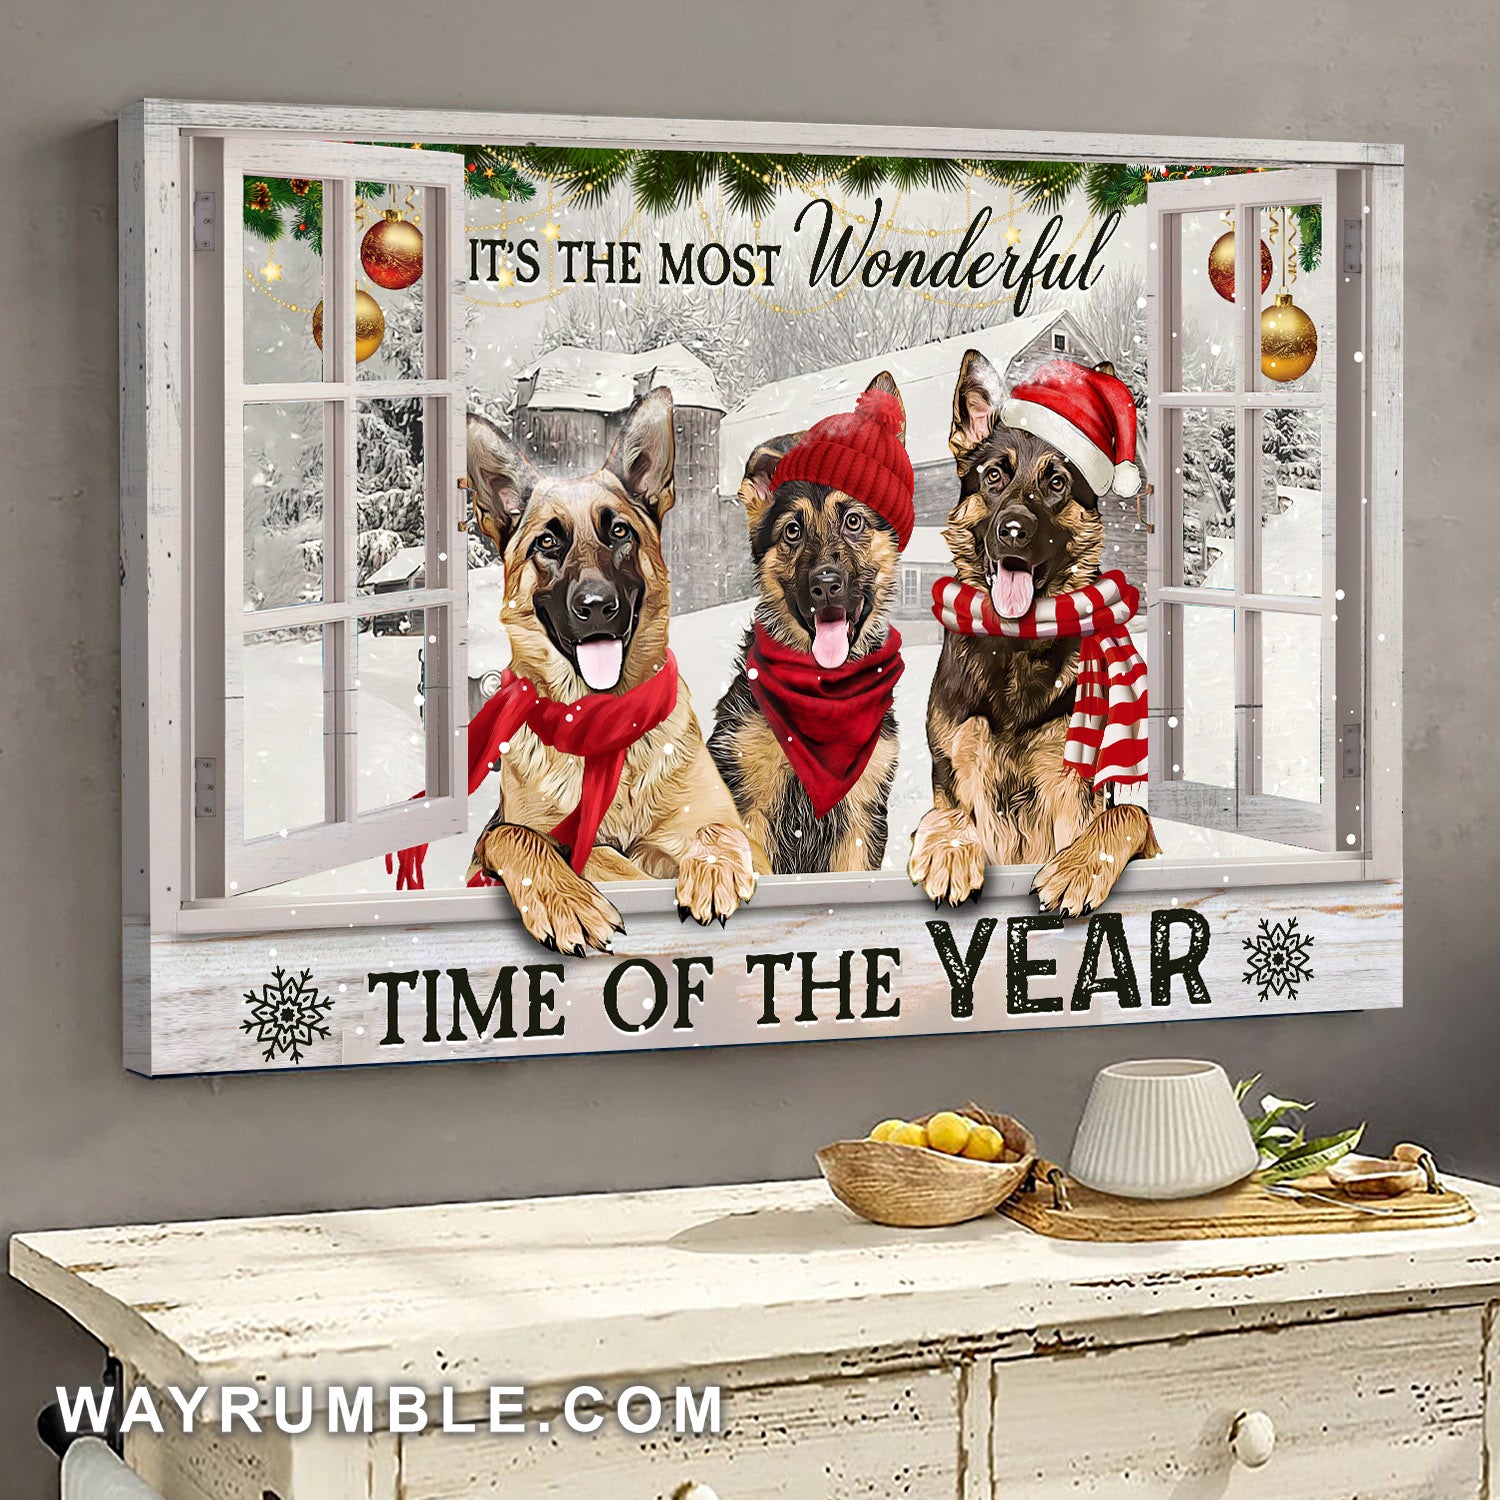 German Shepherd dog, White window, Christmas painting, It's the most wonderful time of the year - Jesus Landscape Canvas Prints, Wall Art